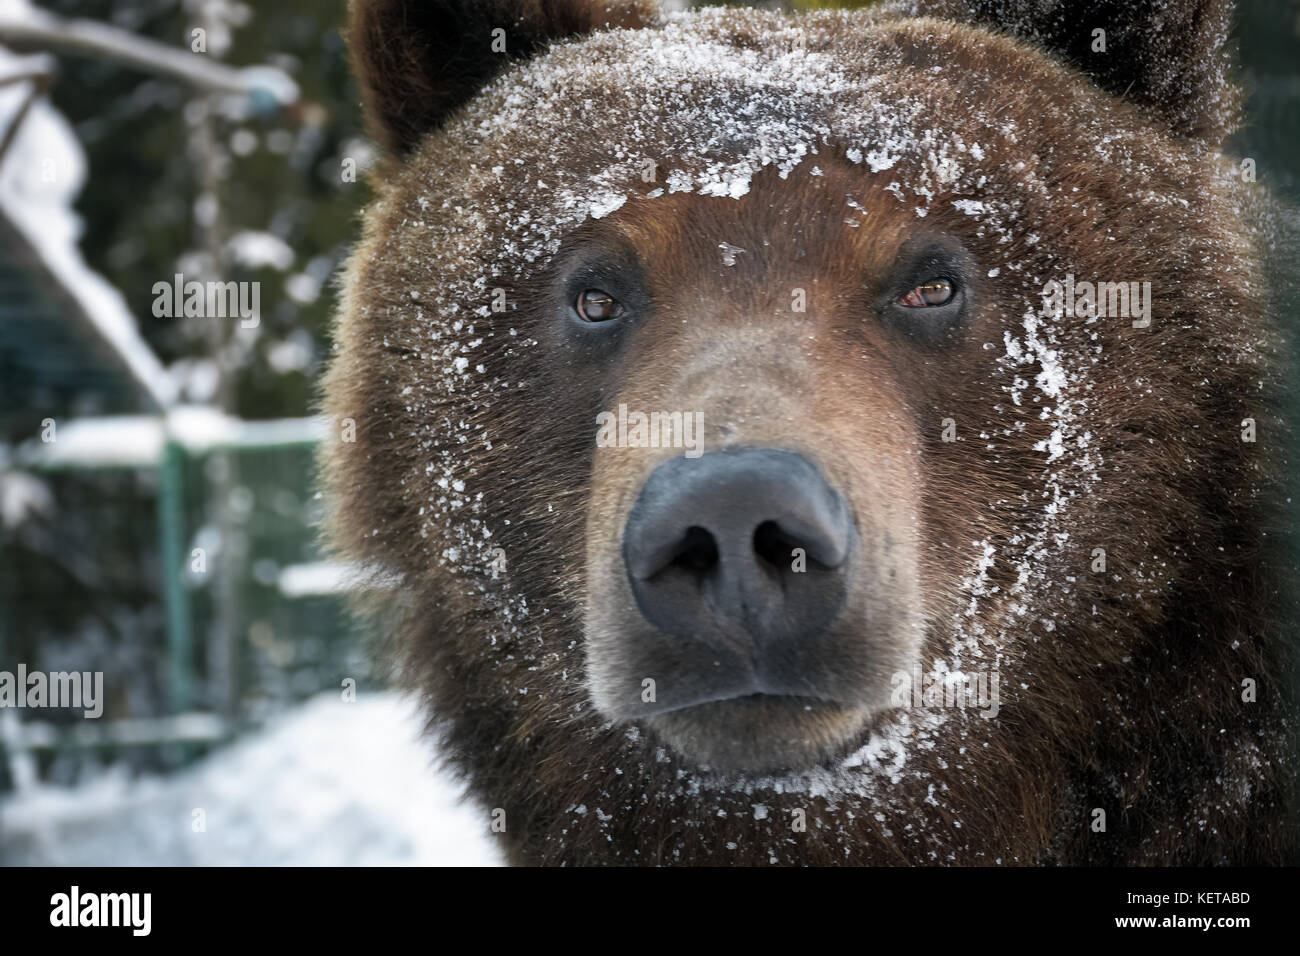 muzzle of a brown bear in snow. curious animal look. focus on eyes Stock Photo